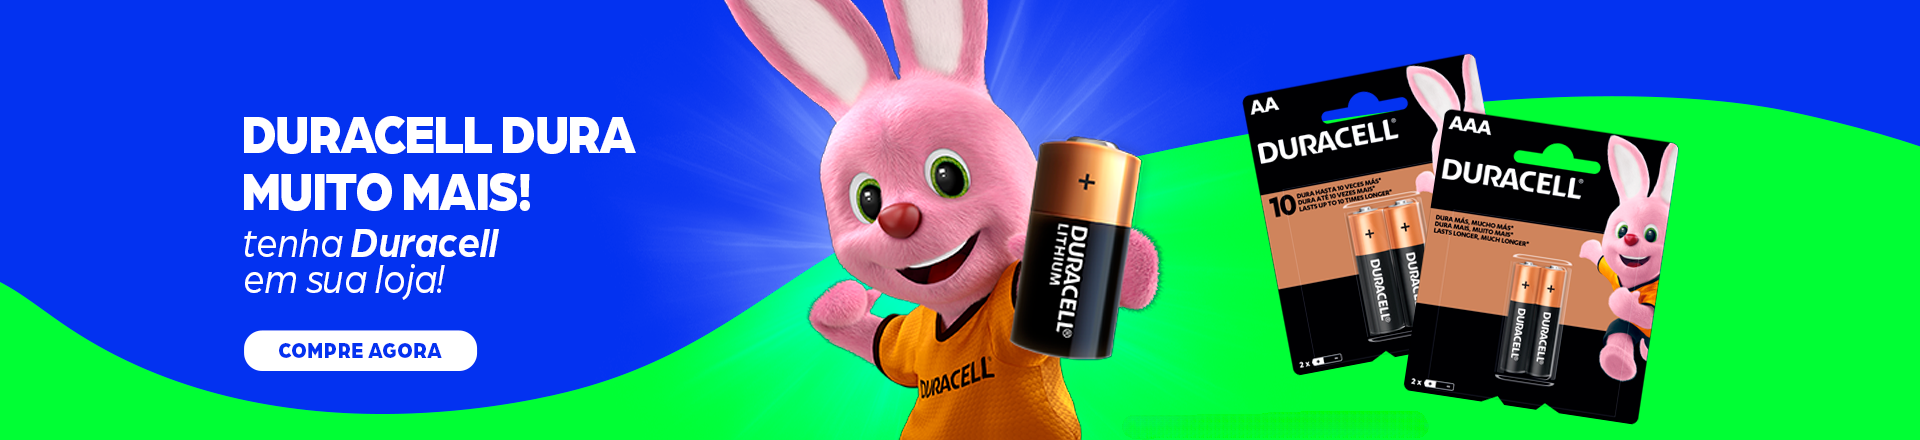 Itens Duracell